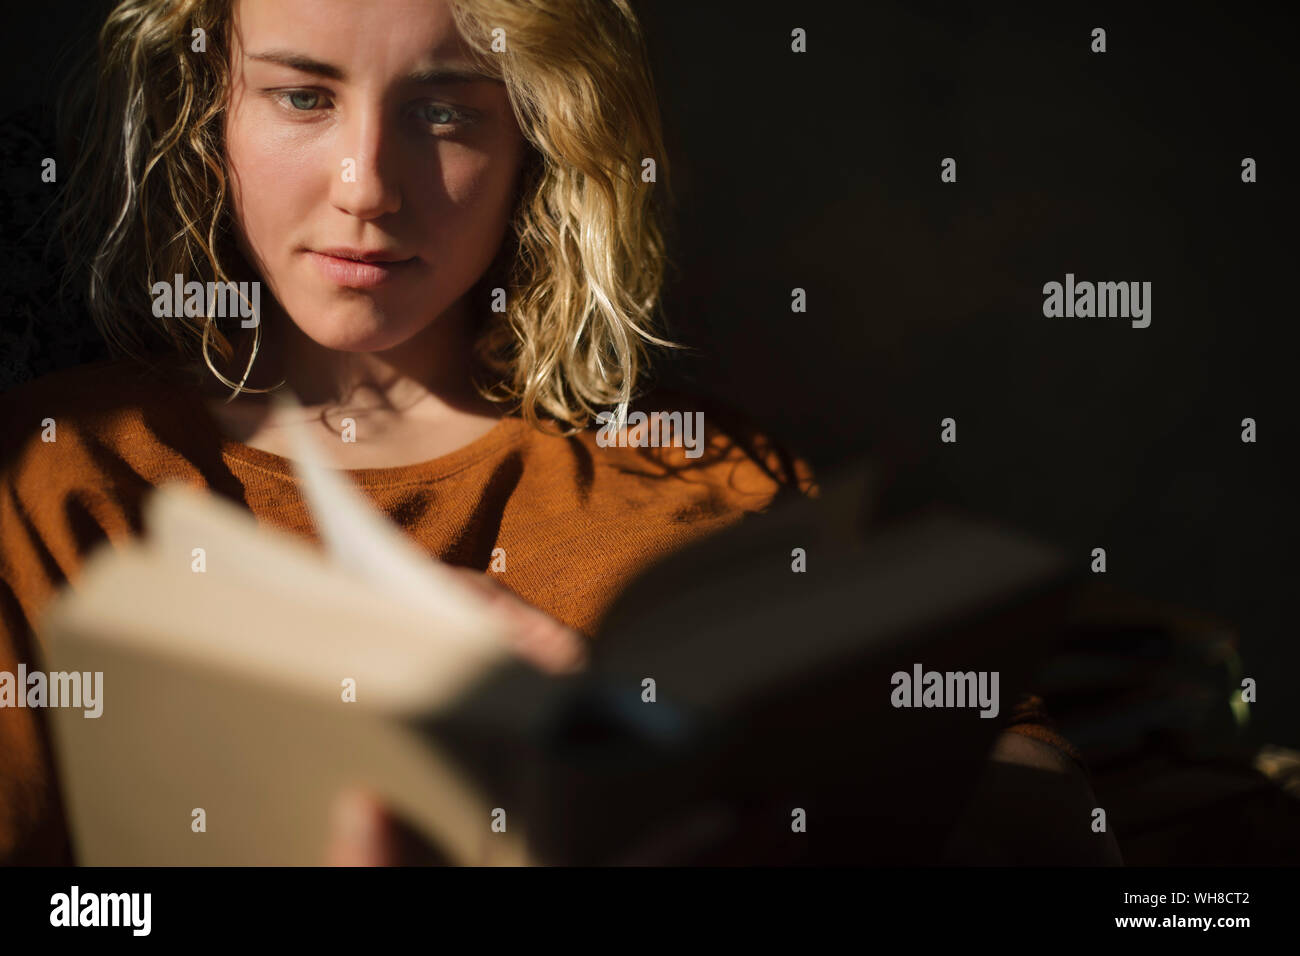 Young blonde woman reading a book Banque D'Images